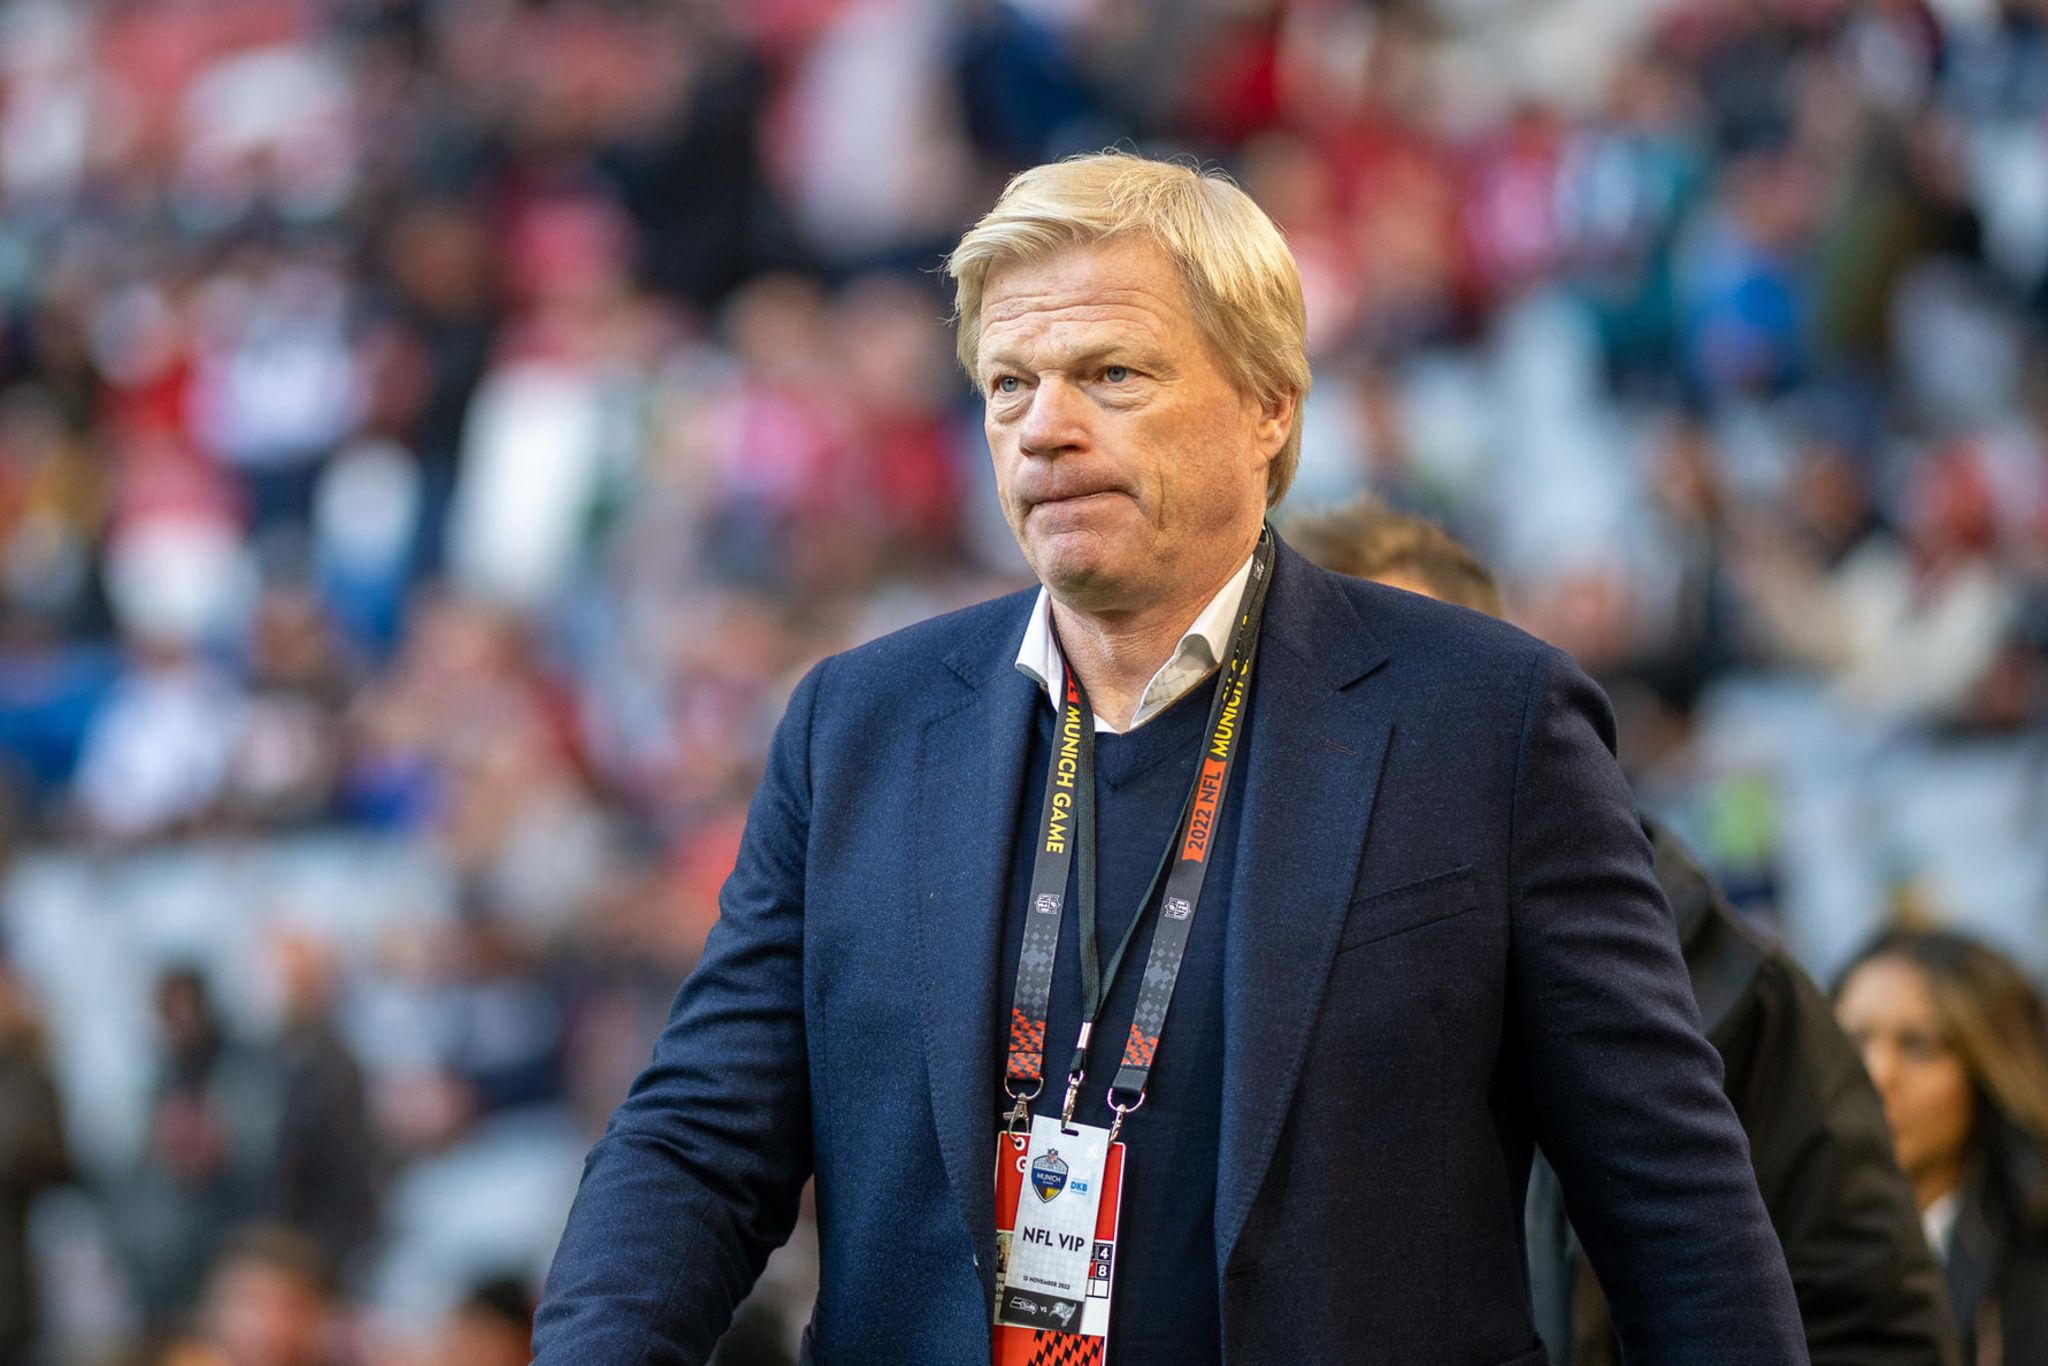 Oliver Kahn reveals struggles with depression, burnout during his playing  career - Bavarian Football Works